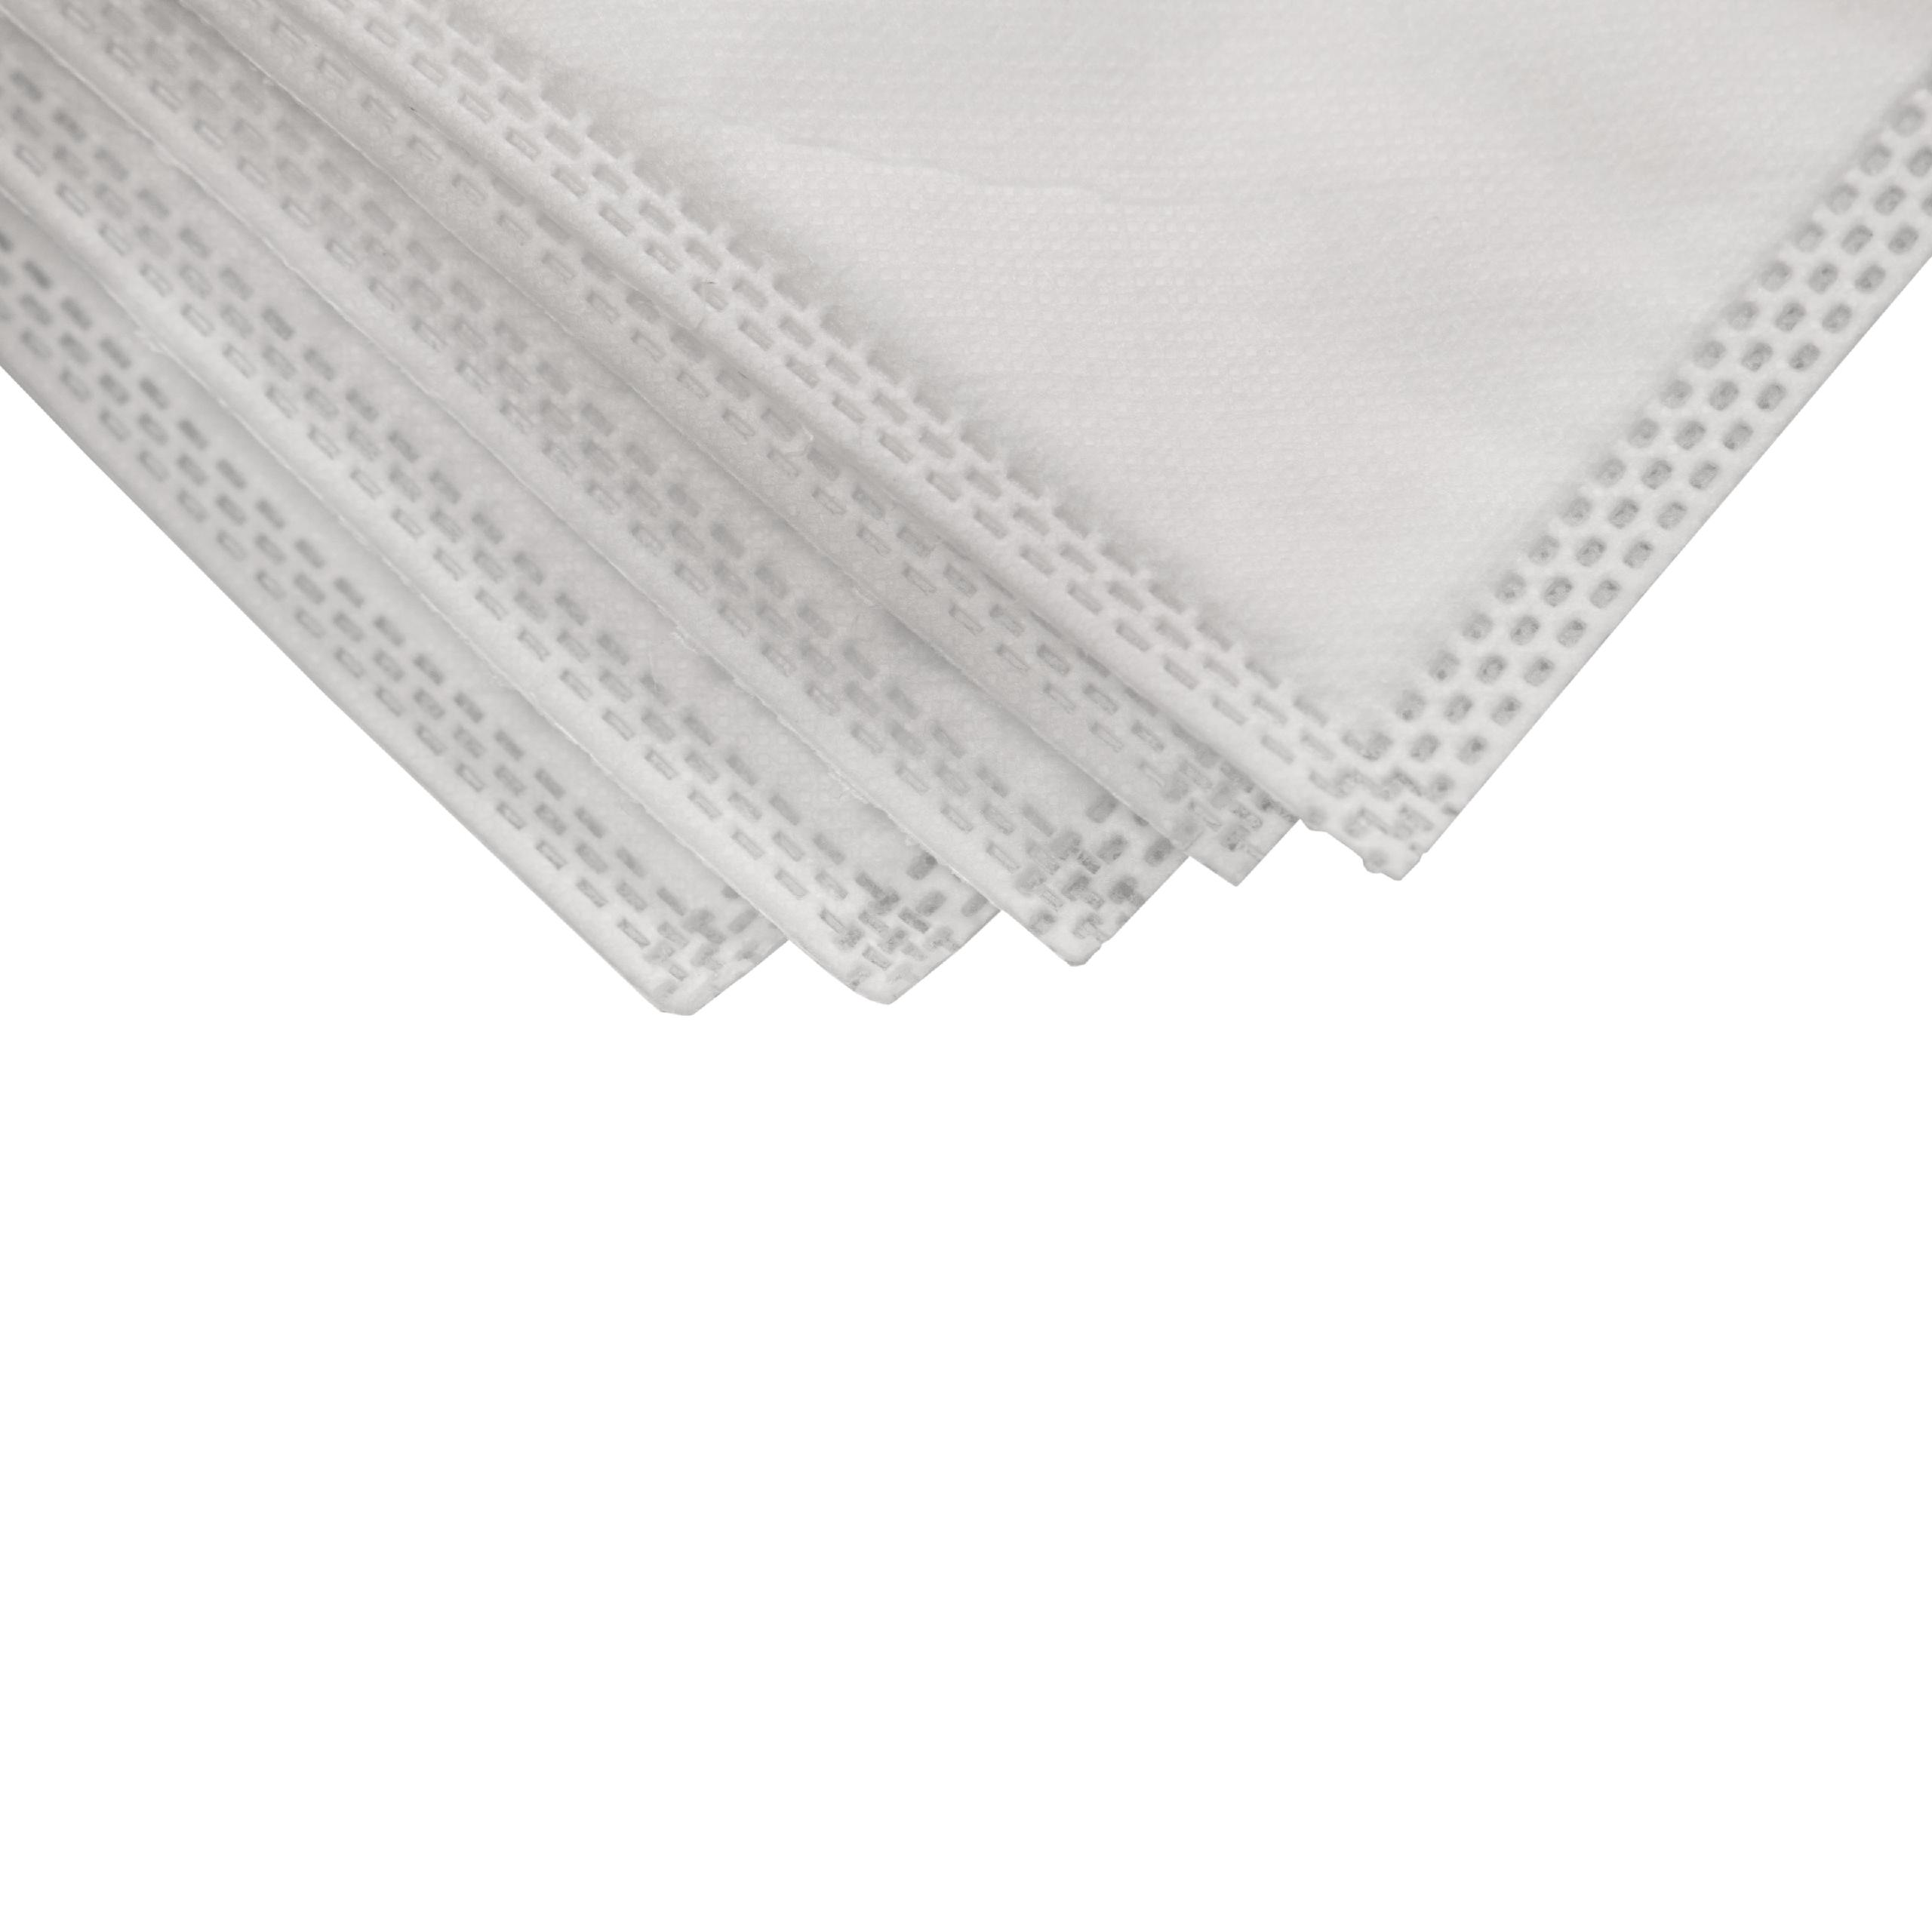 5x Vacuum Cleaner Bag replaces BVC 13060 for BVC - microfleece